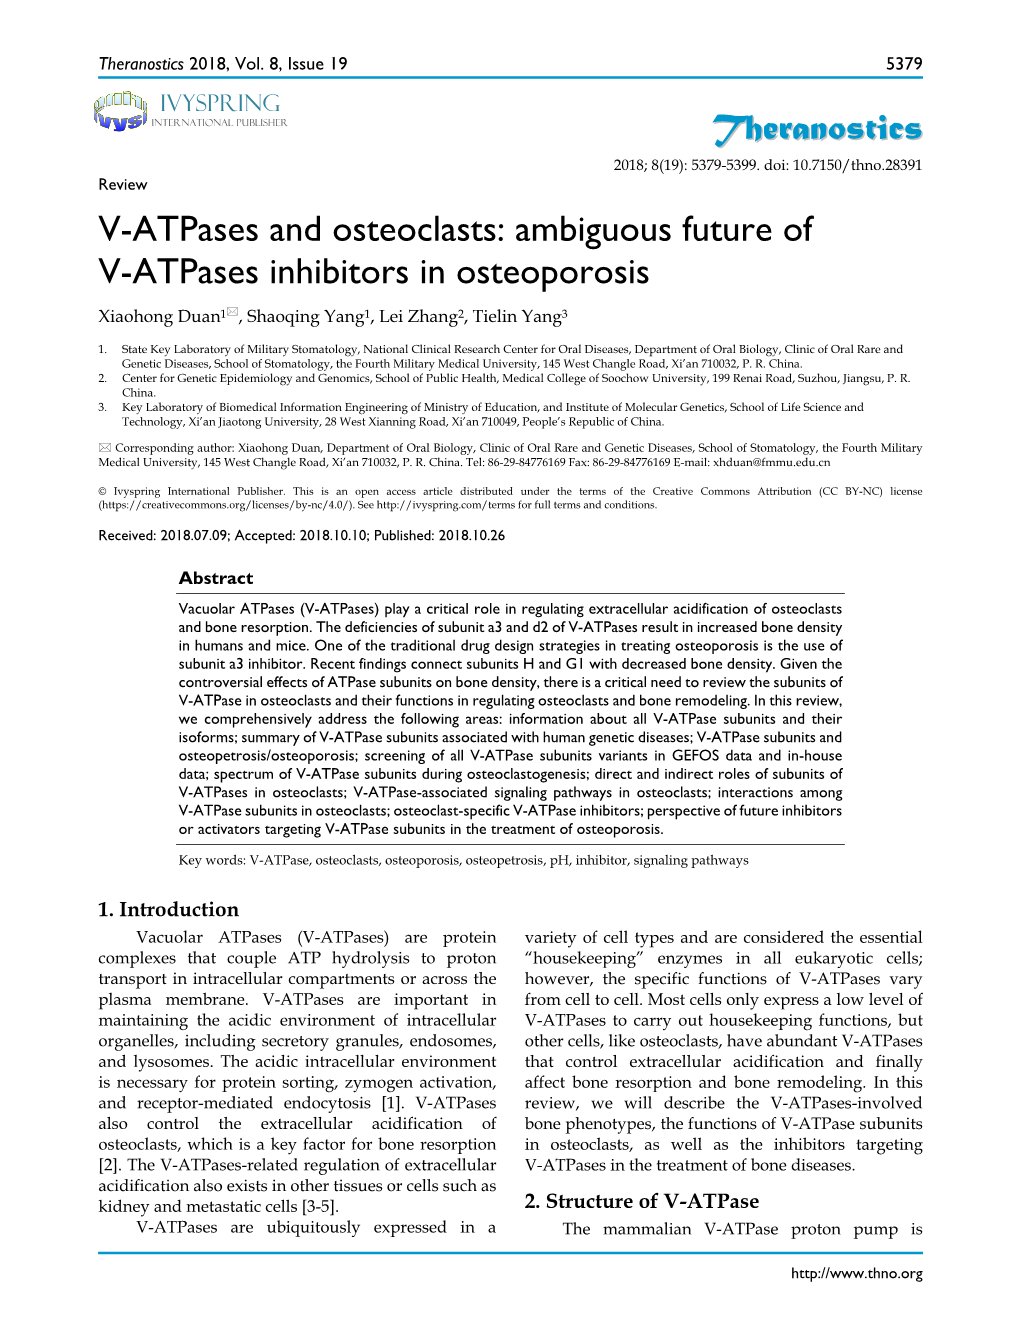 V-Atpases and Osteoclasts: Ambiguous Future of V-Atpases Inhibitors in Osteoporosis Xiaohong Duan1, Shaoqing Yang1, Lei Zhang2, Tielin Yang3